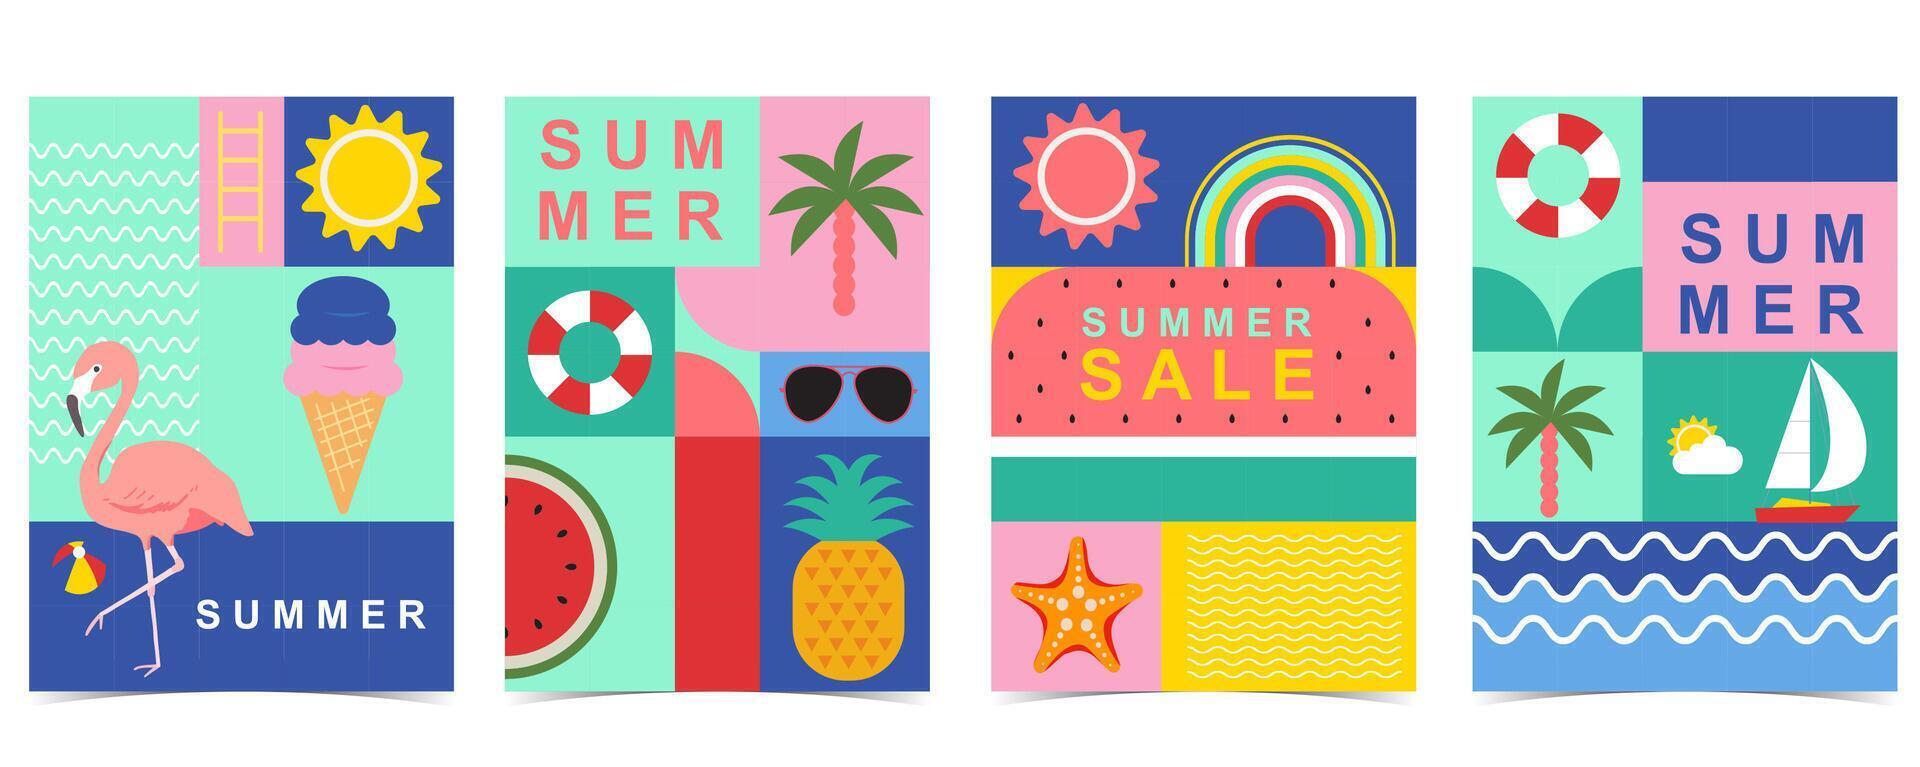 summer background with geometric style.illustration for a4 vertical design vector